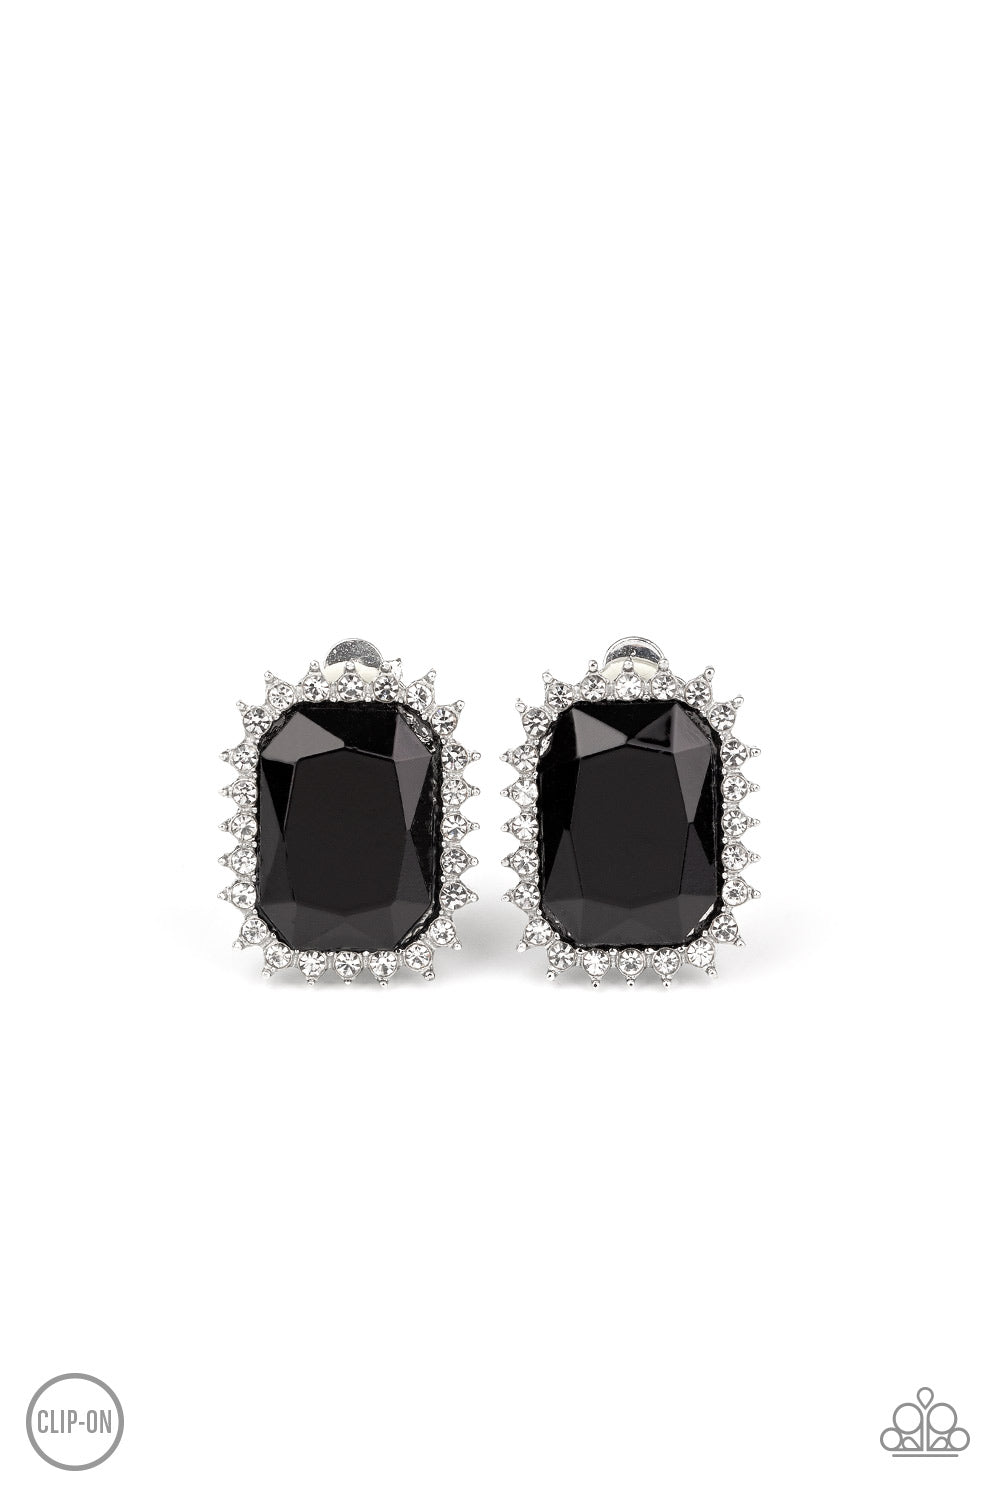 Insta Famous - Black Clip-On Earrings - Paparazzi Accessories